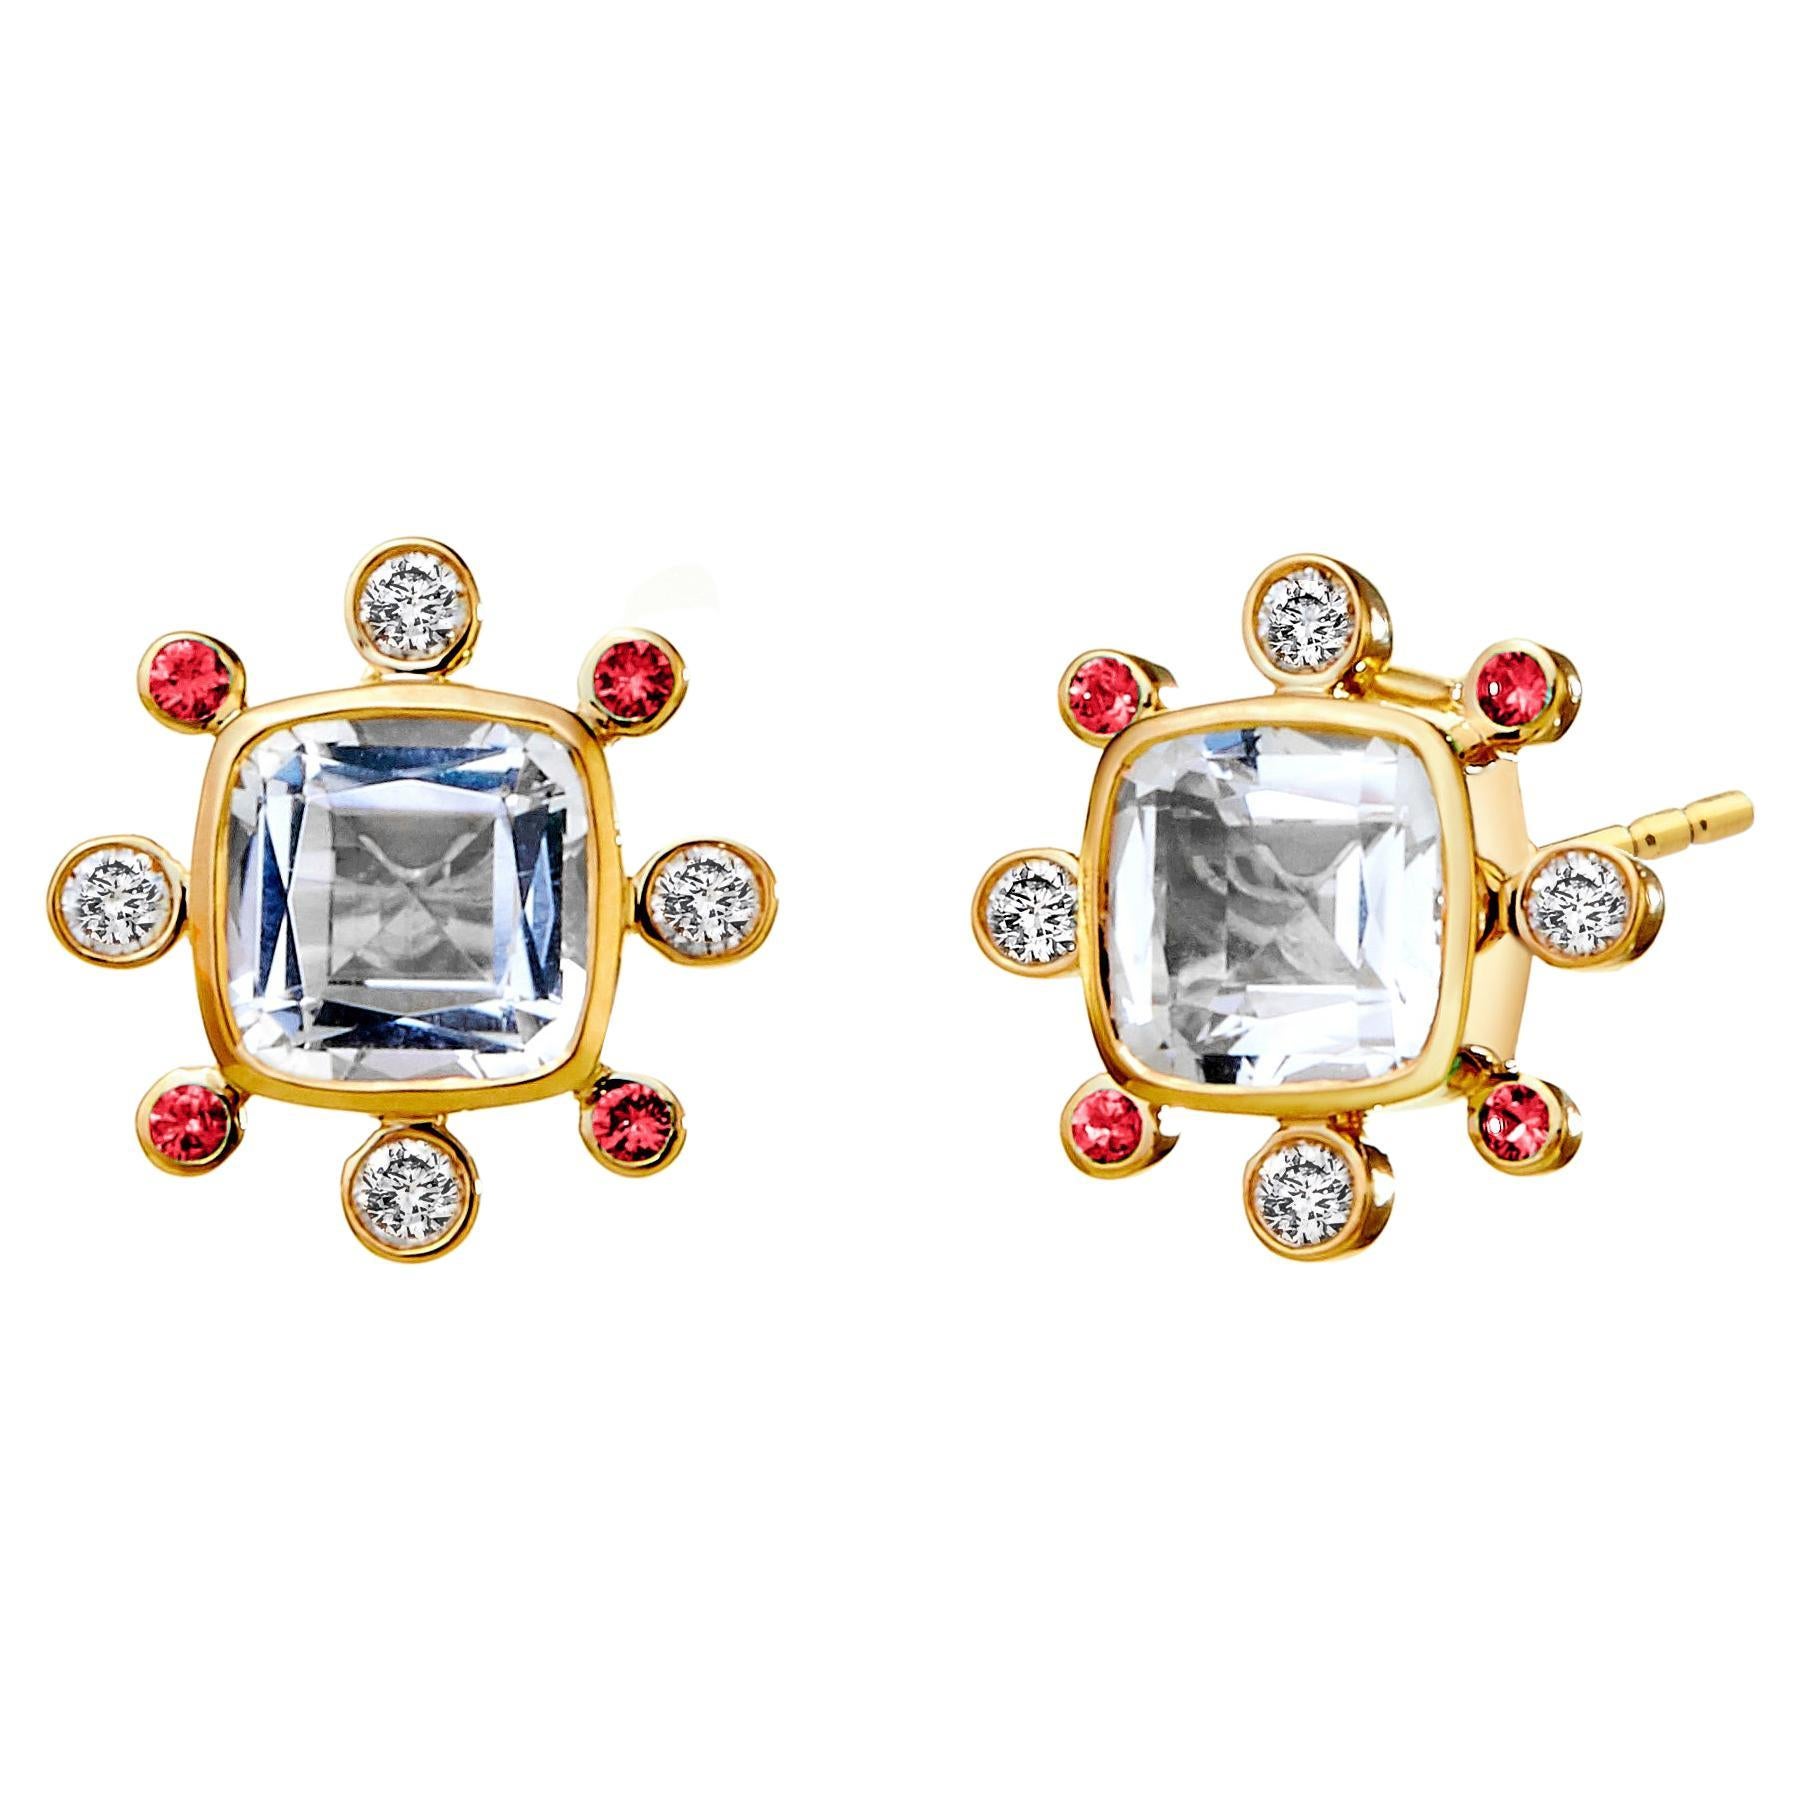 Syna Yellow Gold Rock Crystal Earrings with Rubies and Diamonds For Sale